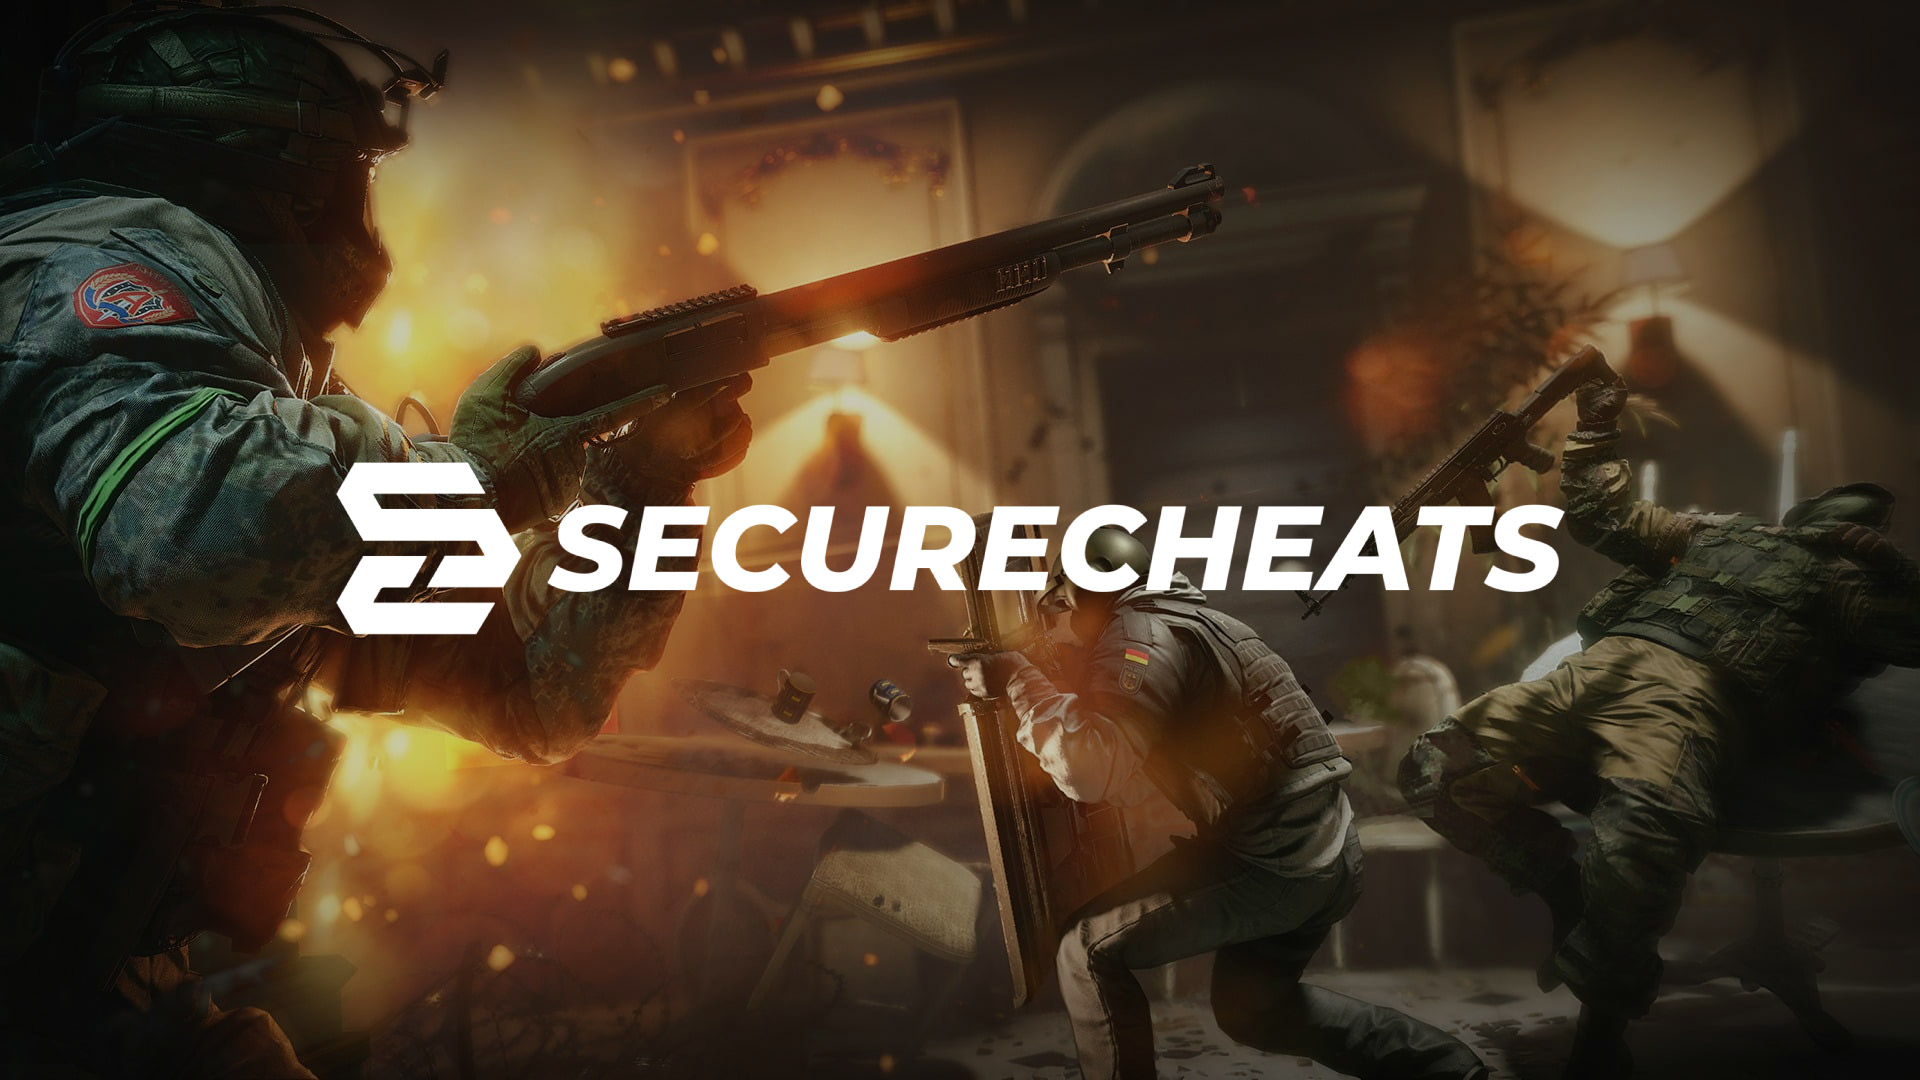 SecureCheats - The Best Gaming Cheats & Hacks For PC